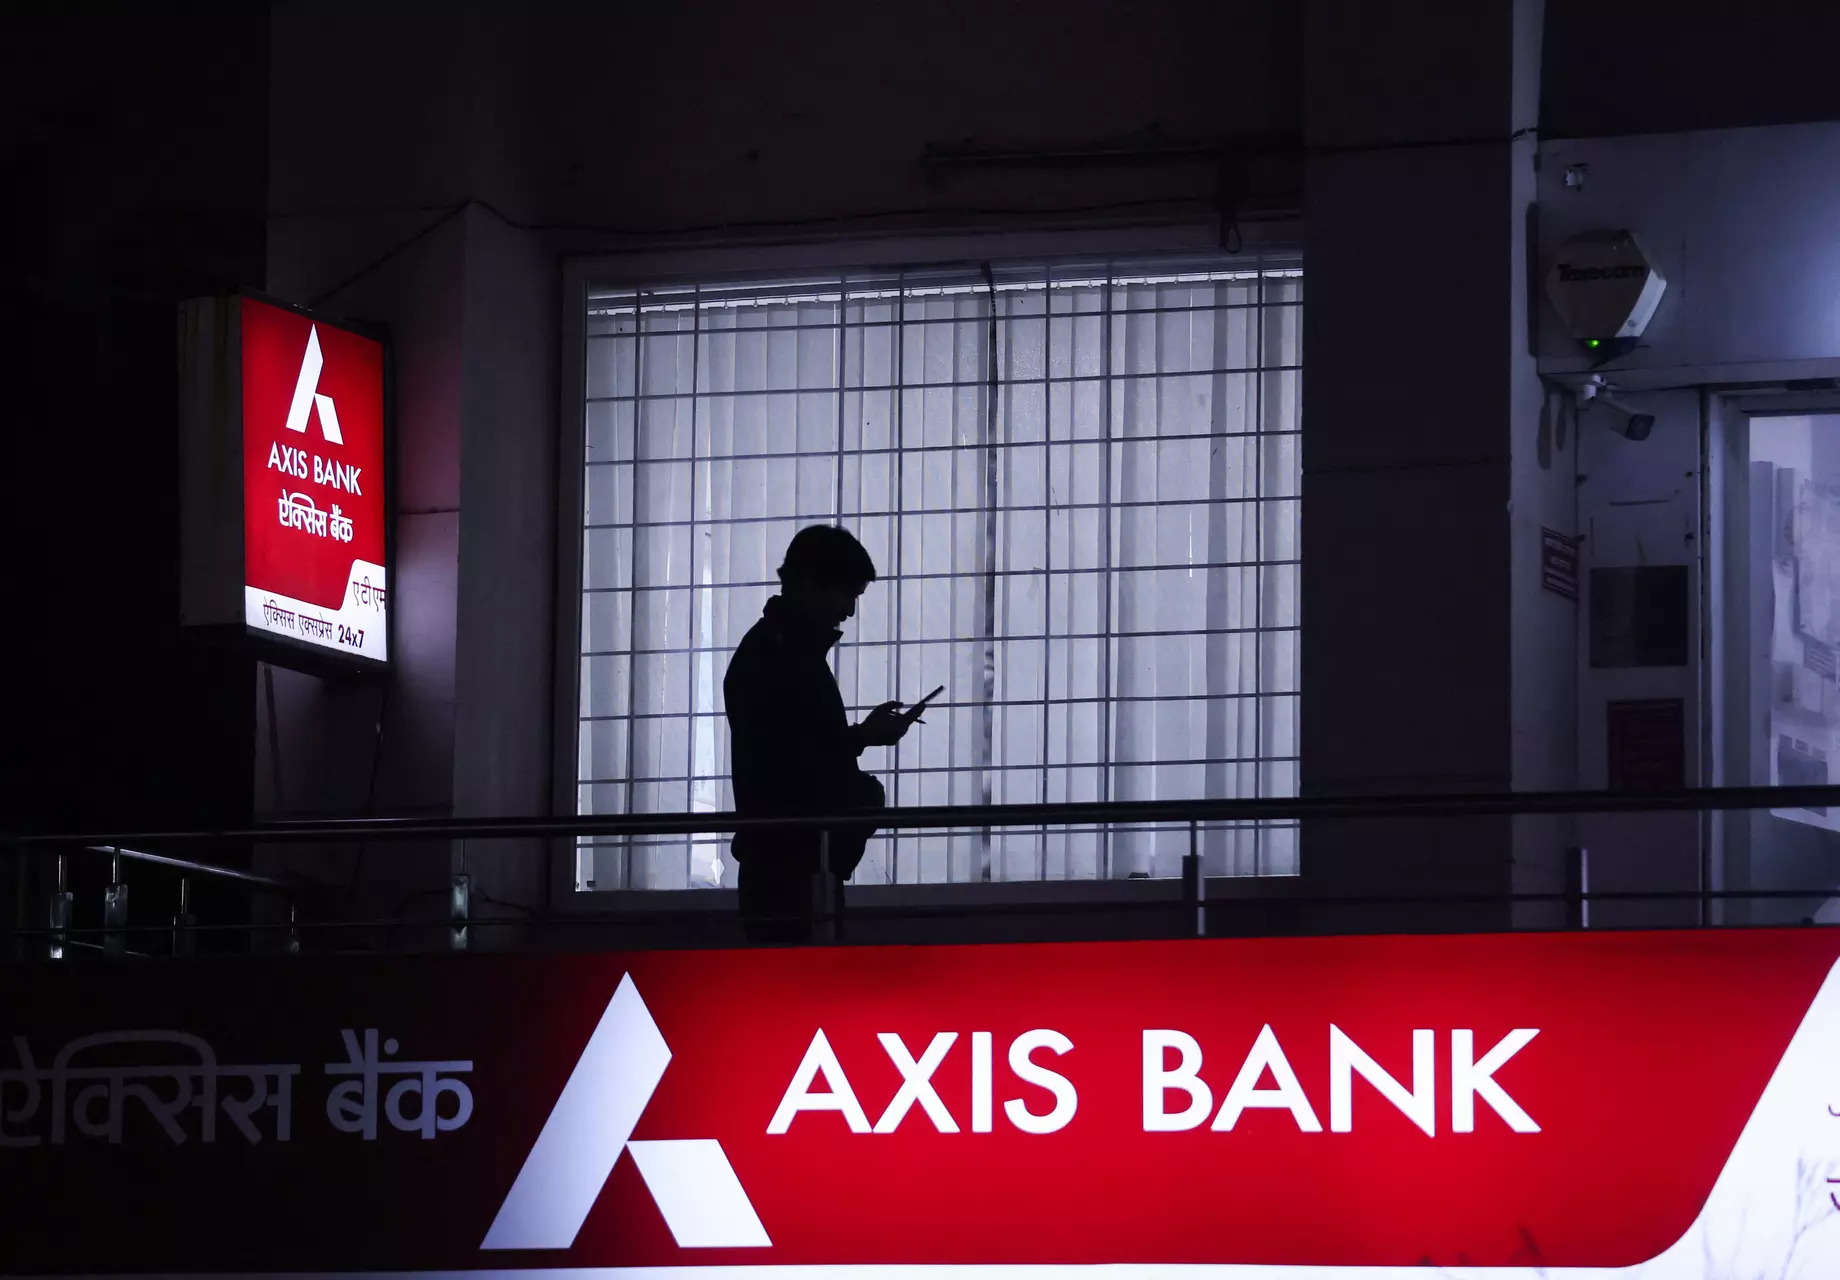 Axis Bank completes migration of Citibank customers to its systems 